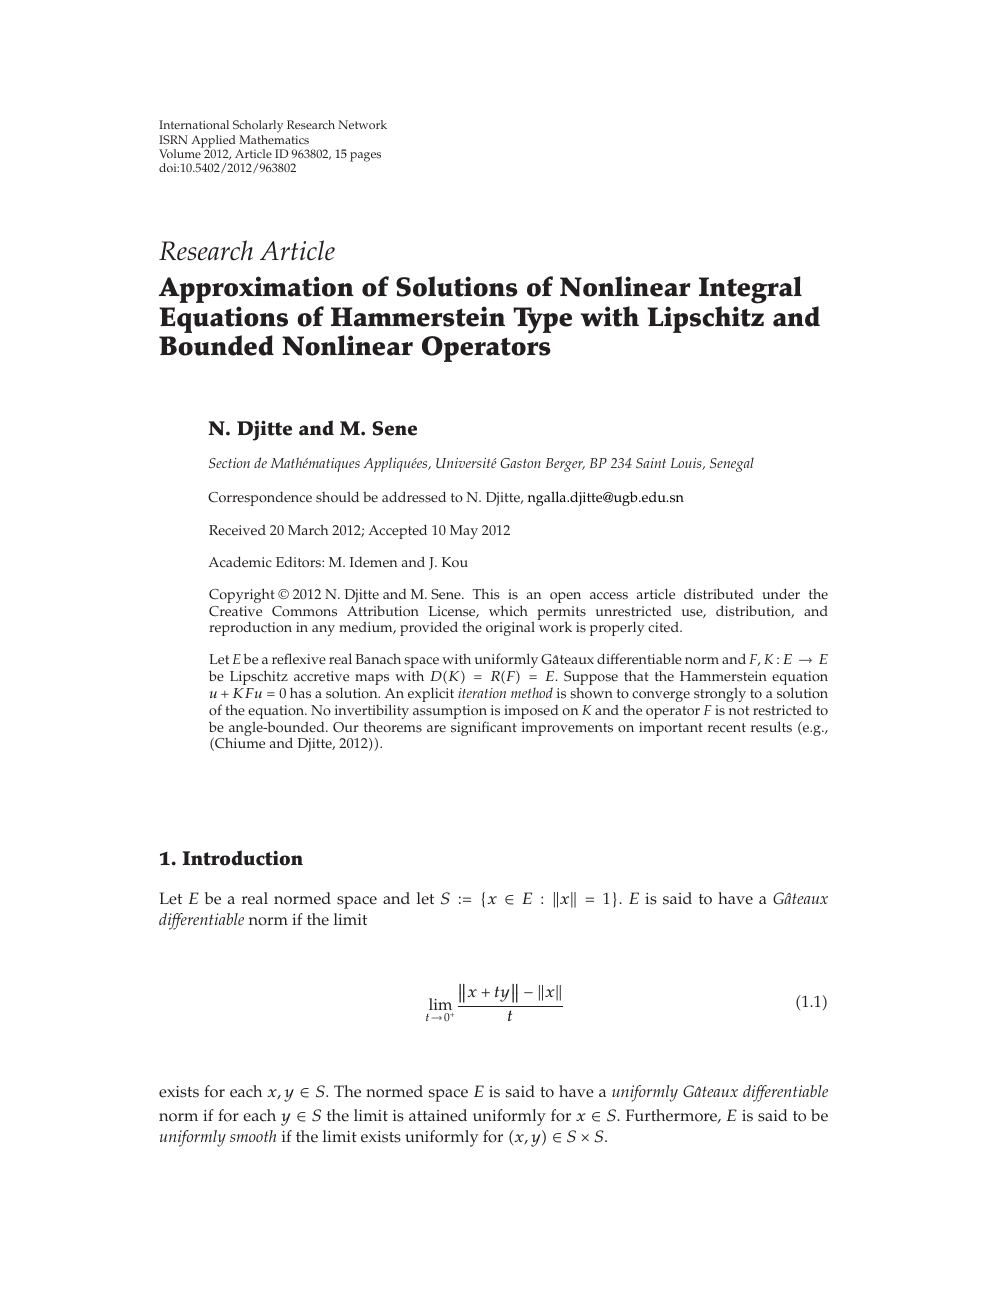 Approximation Of Solutions Of Nonlinear Integral Equations Of Hammerstein Type With Lipschitz And Bounded Nonlinear Operators Topic Of Research Paper In Mathematics Download Scholarly Article Pdf And Read For Free On